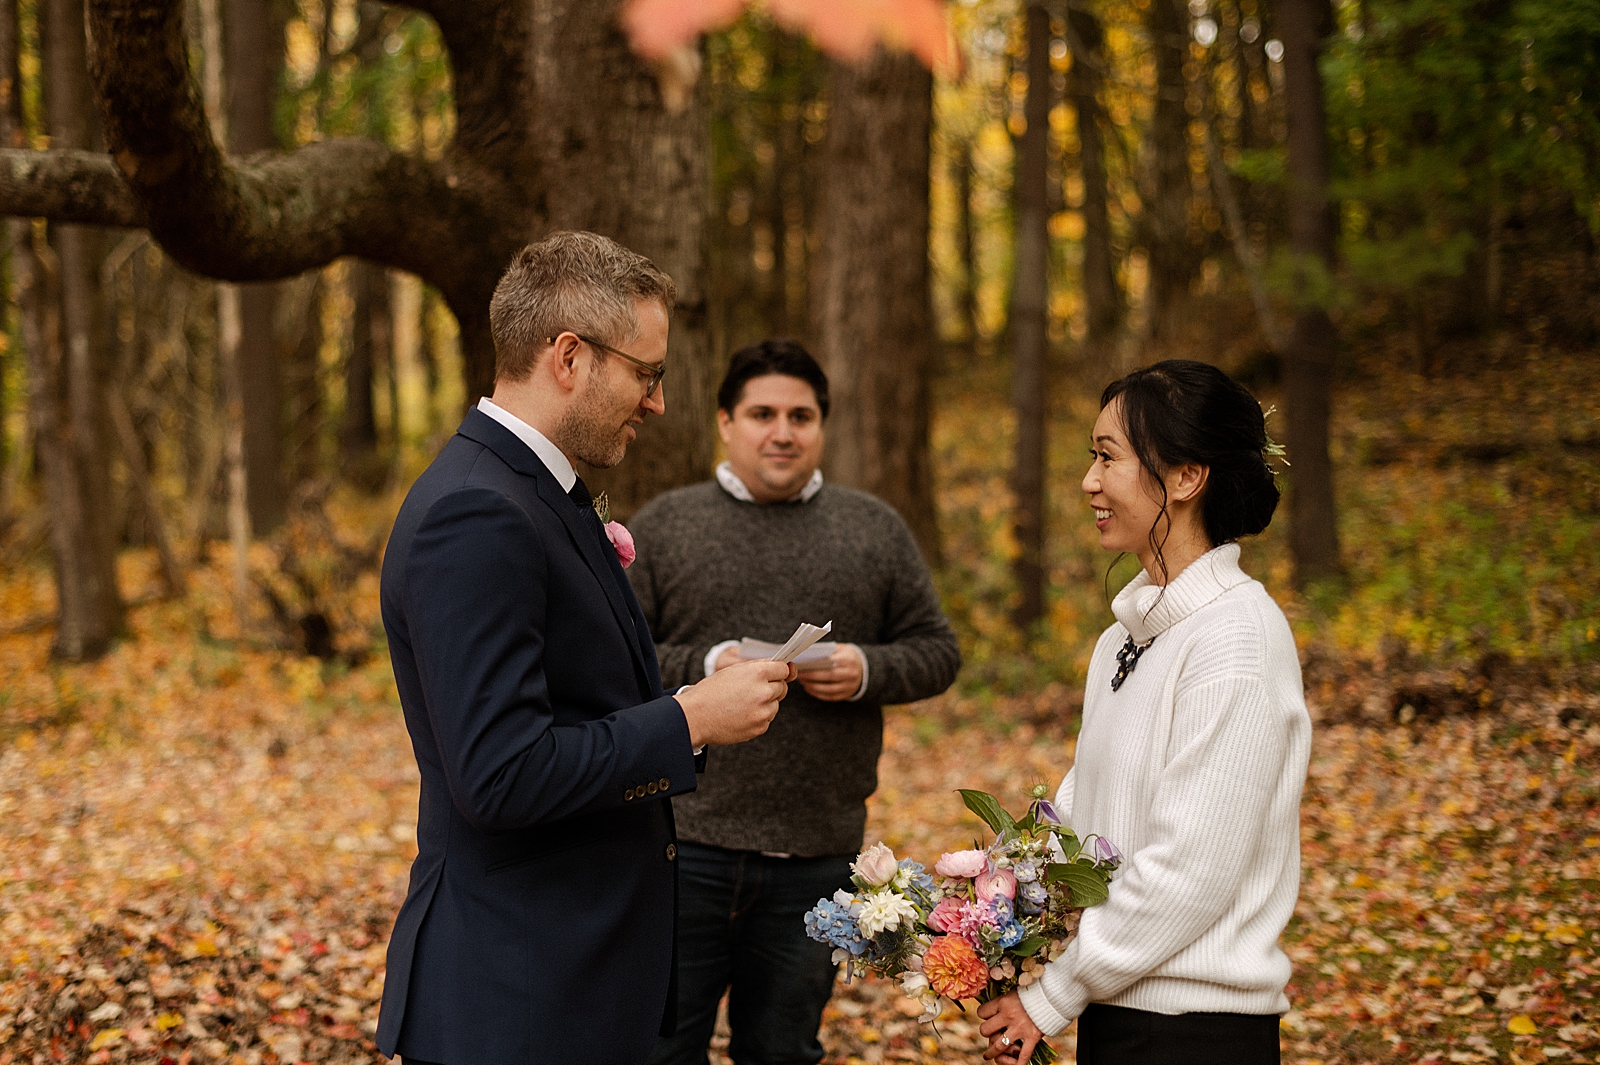 Groom reading vows to Bride while standing on autumn leaf ground